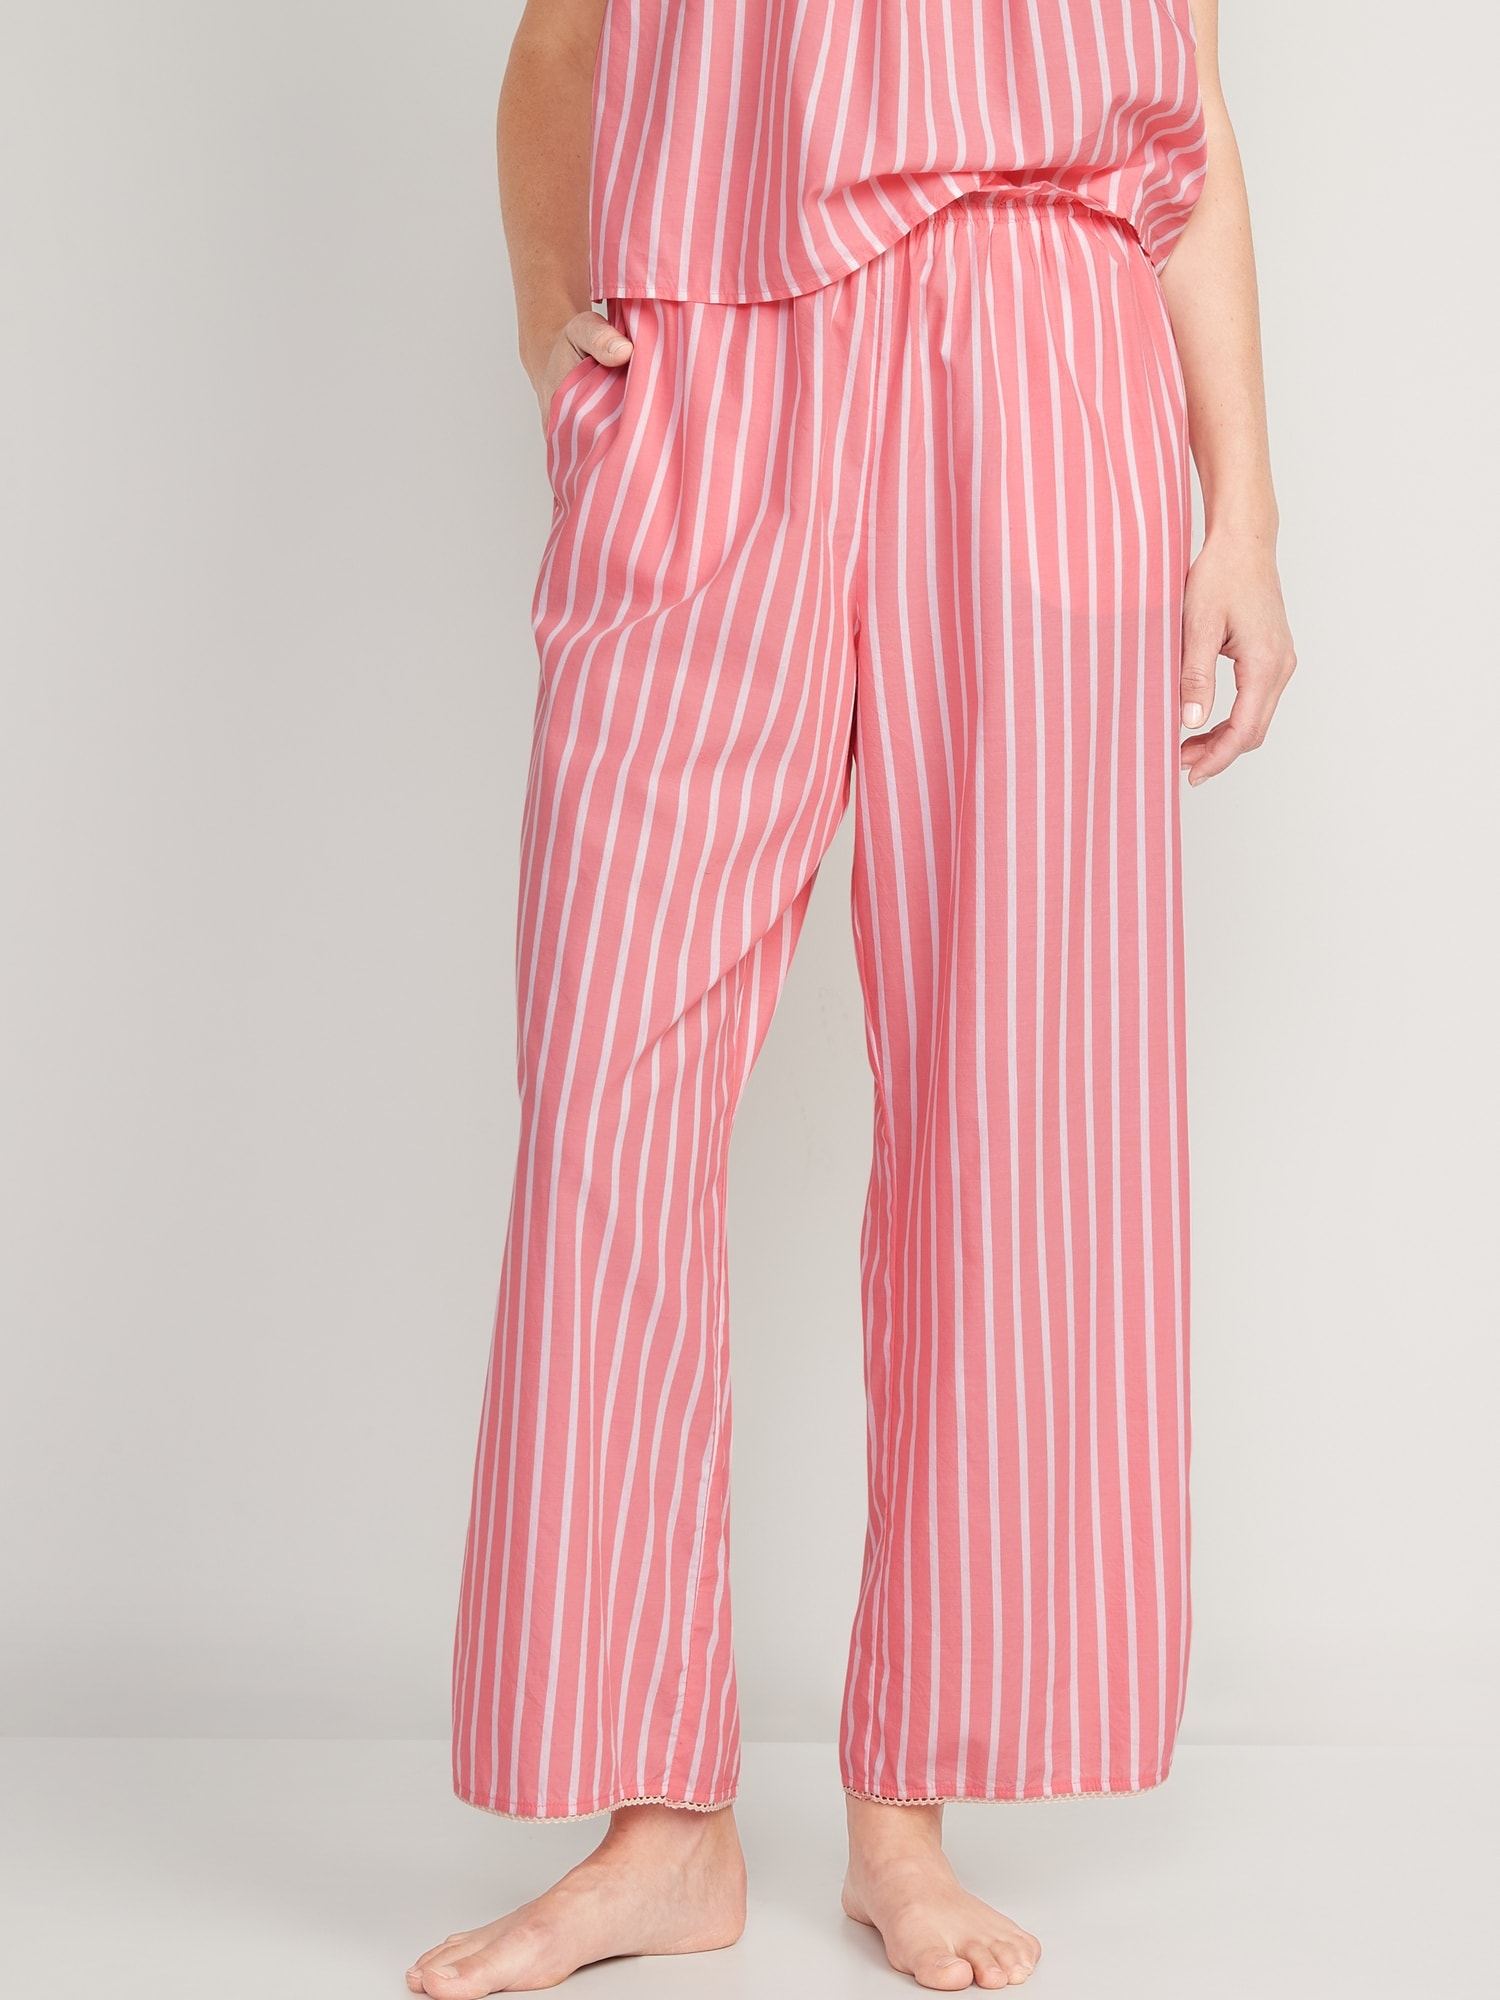 Old Navy High-Waisted Striped Pajama Pants for Women pink. 1